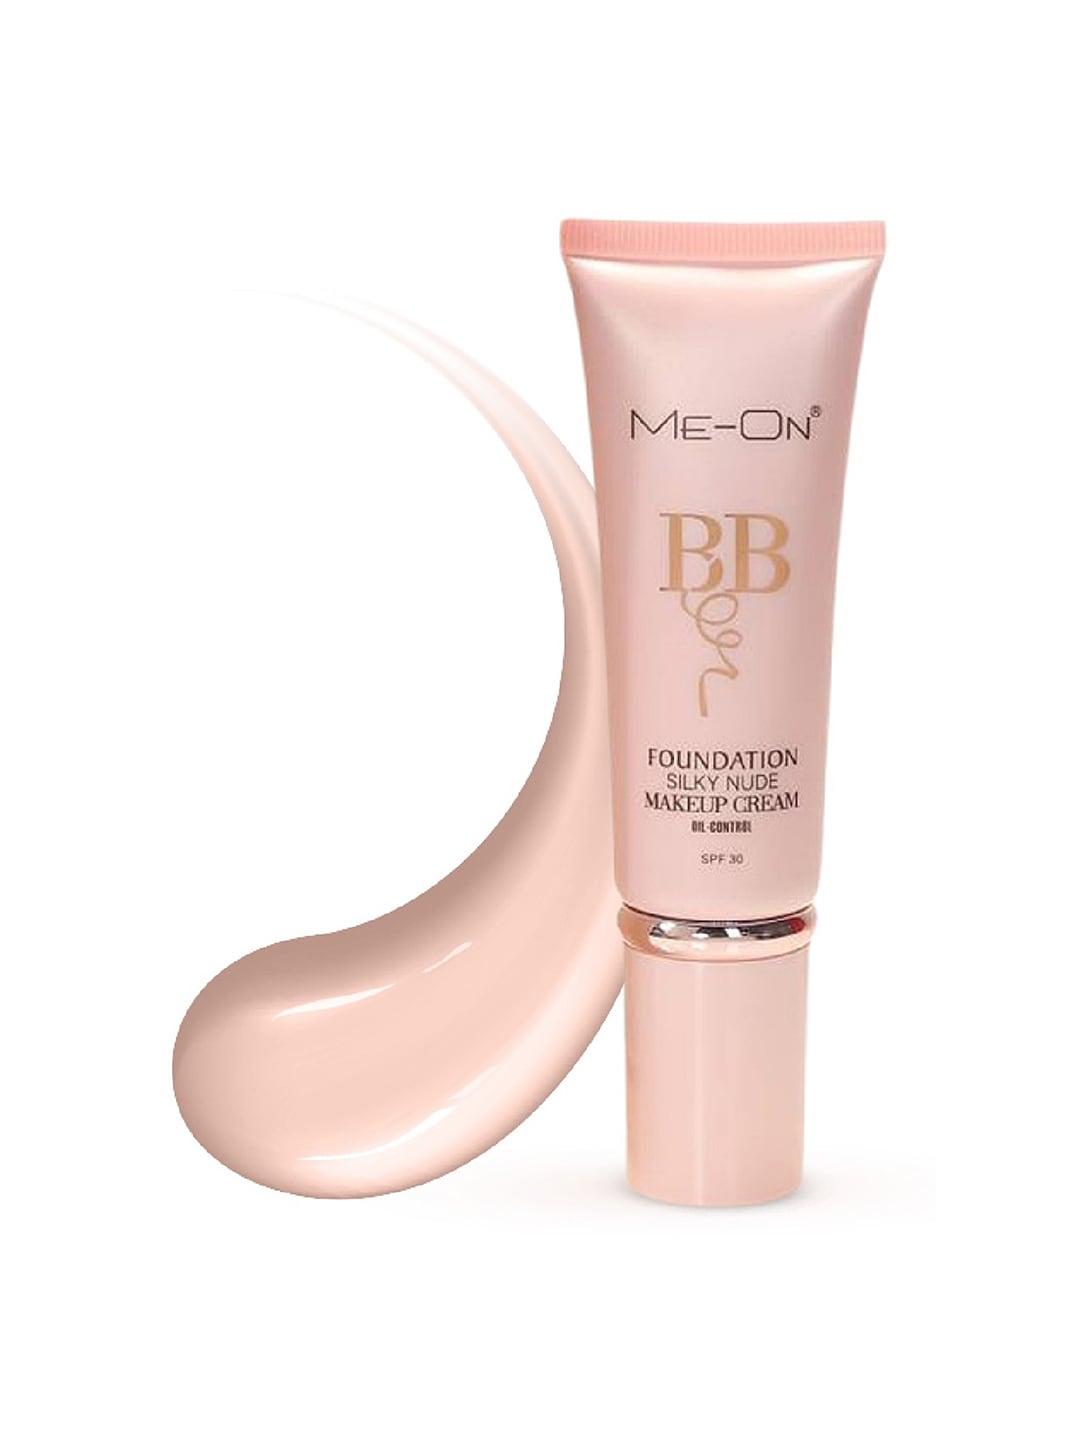 ME-ON BB Foundation Oil Control - Pearl 01 Price in India